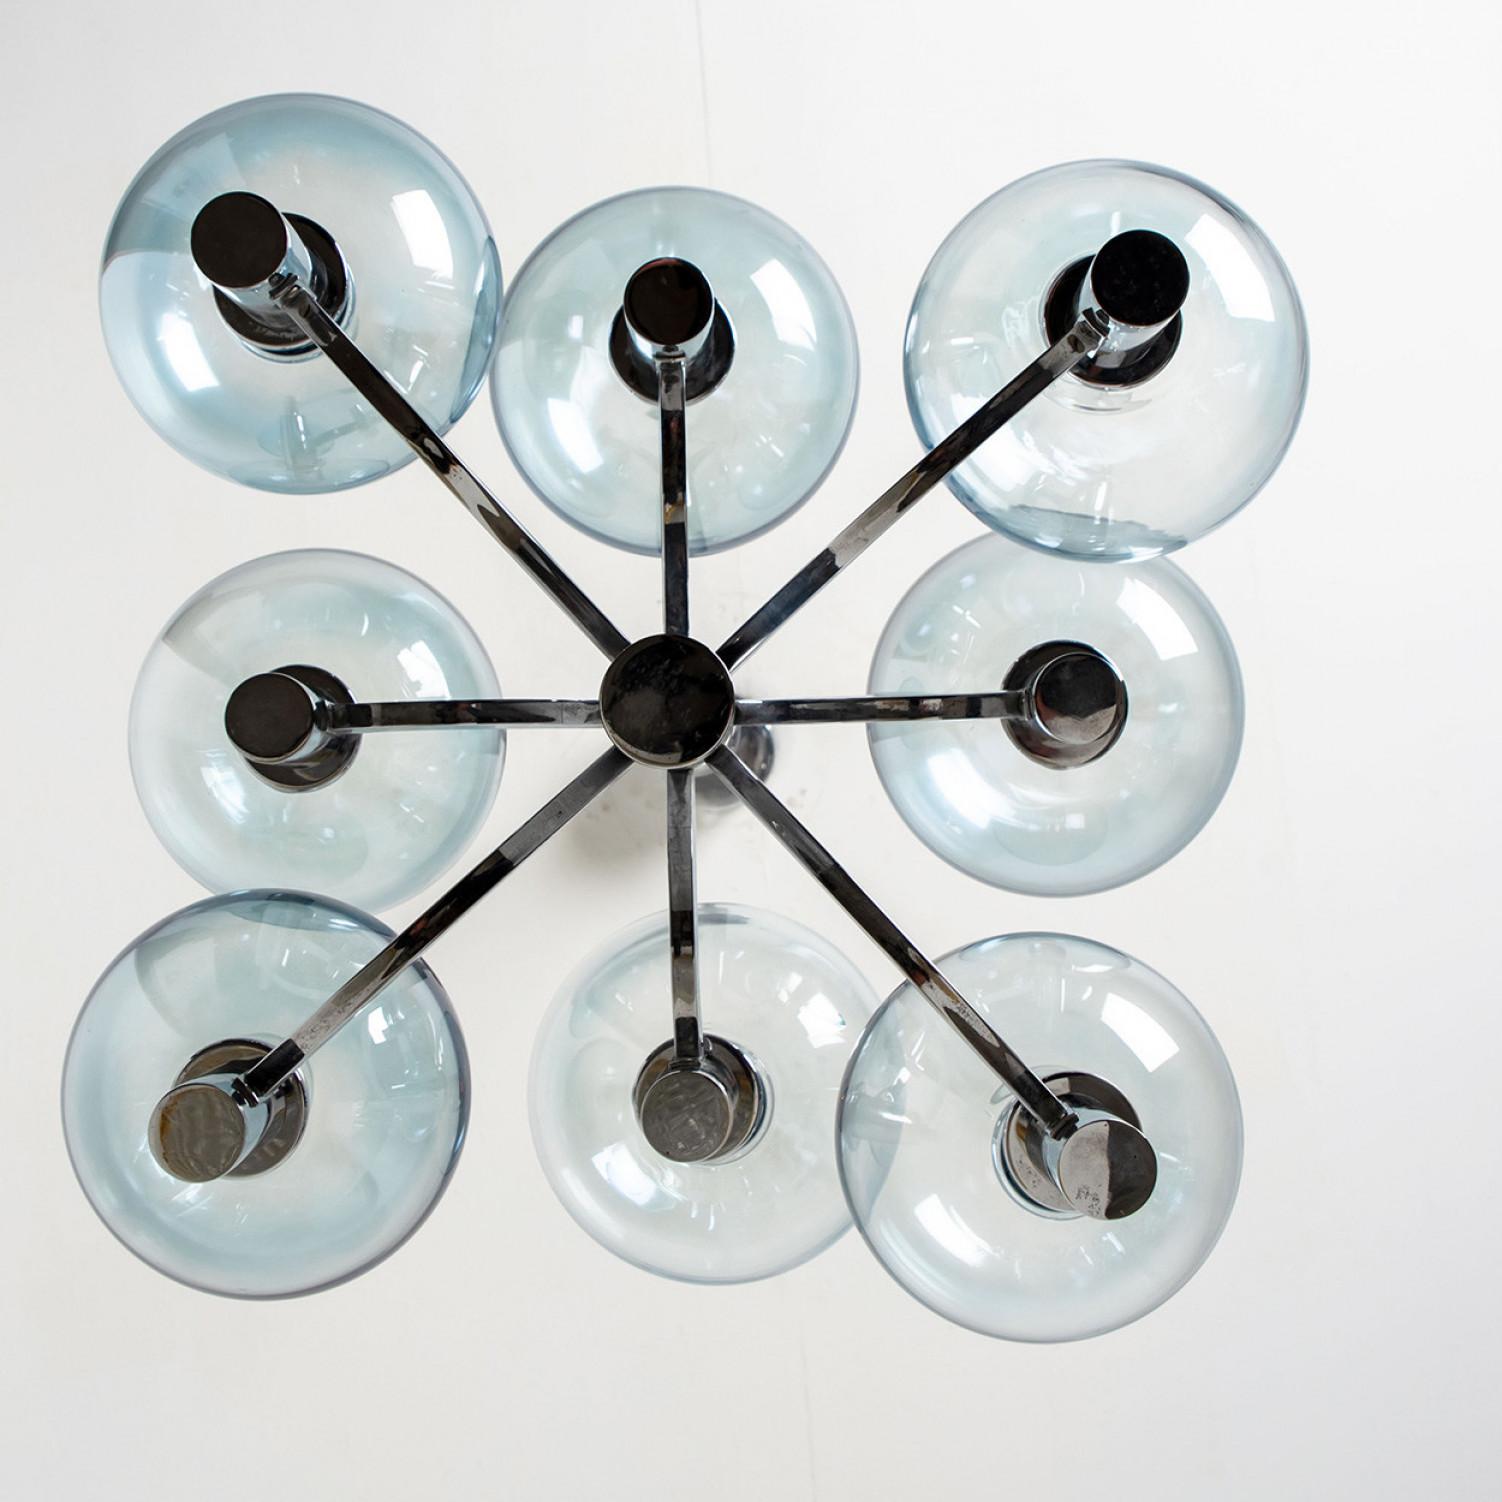 Chrome and Light Blue Glass Chandelier in the style of Arne Jakobsson, 1970s For Sale 2